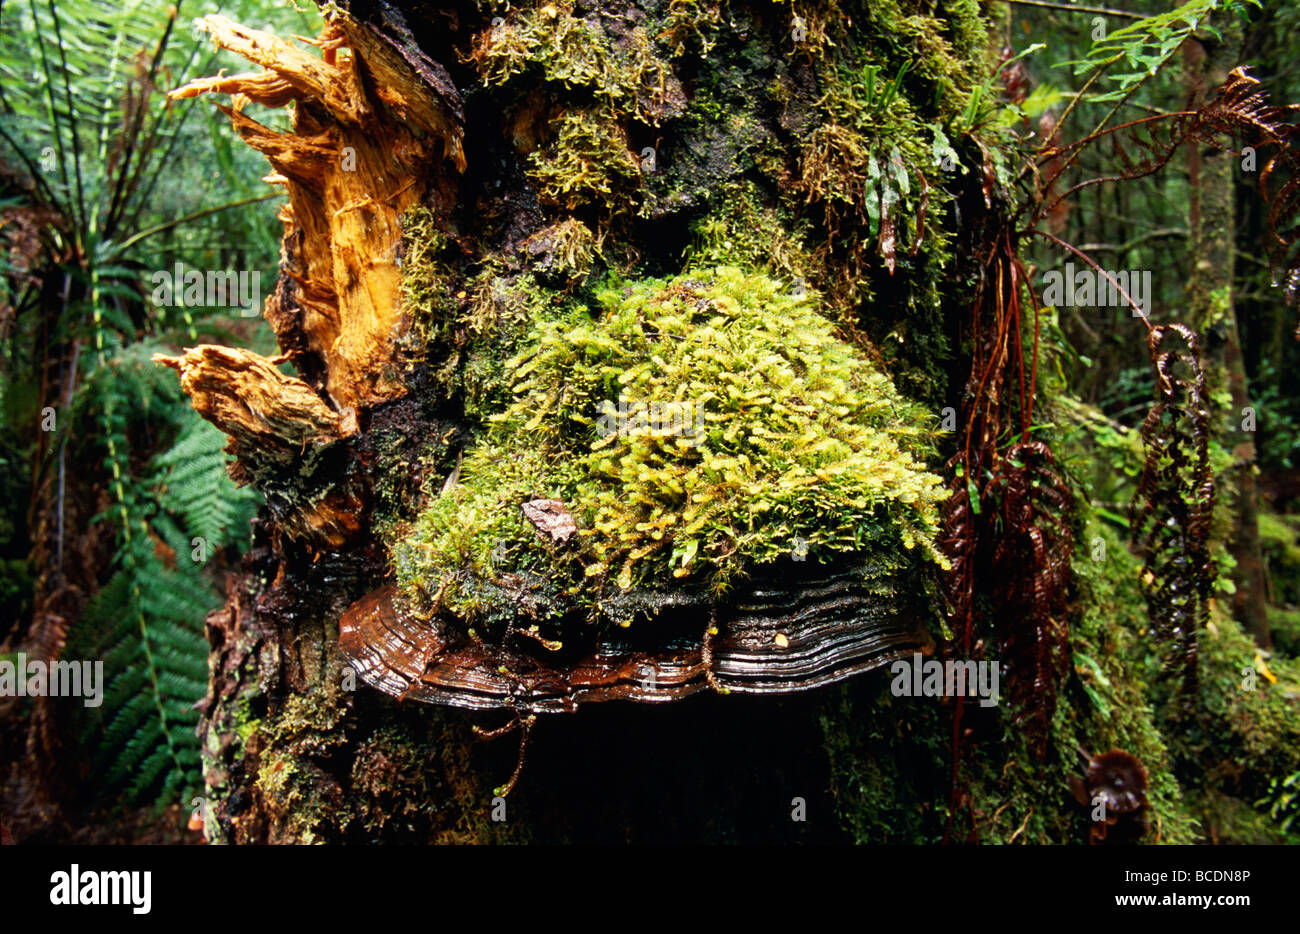 A large Bracket Fungus covered by a Ganoderma species moss. Stock Photo